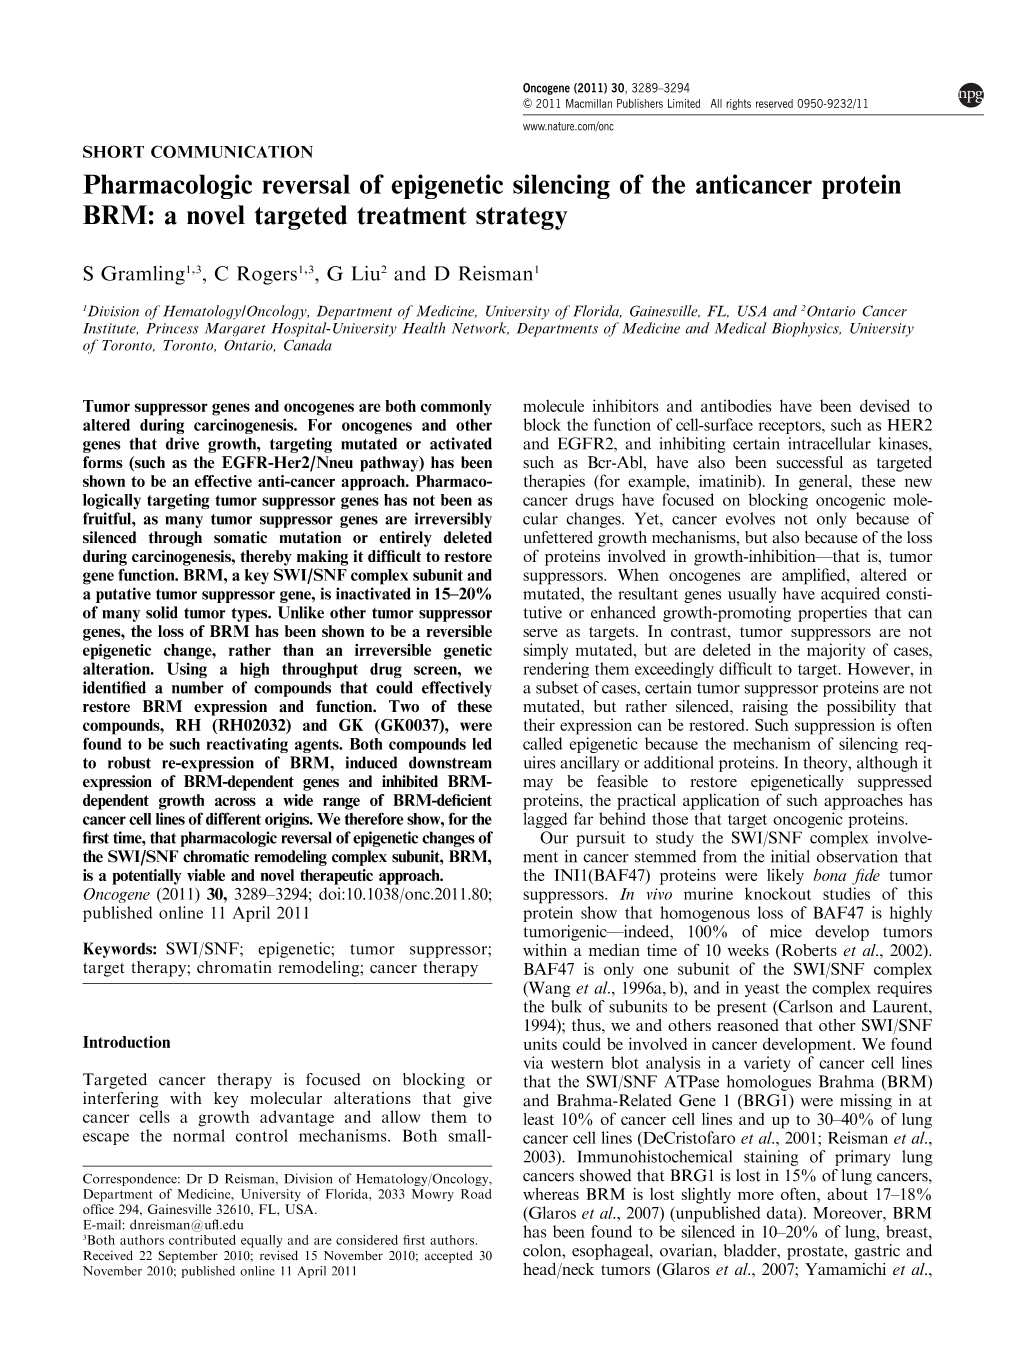 Pharmacologic Reversal of Epigenetic Silencing of the Anticancer Protein BRM: a Novel Targeted Treatment Strategy